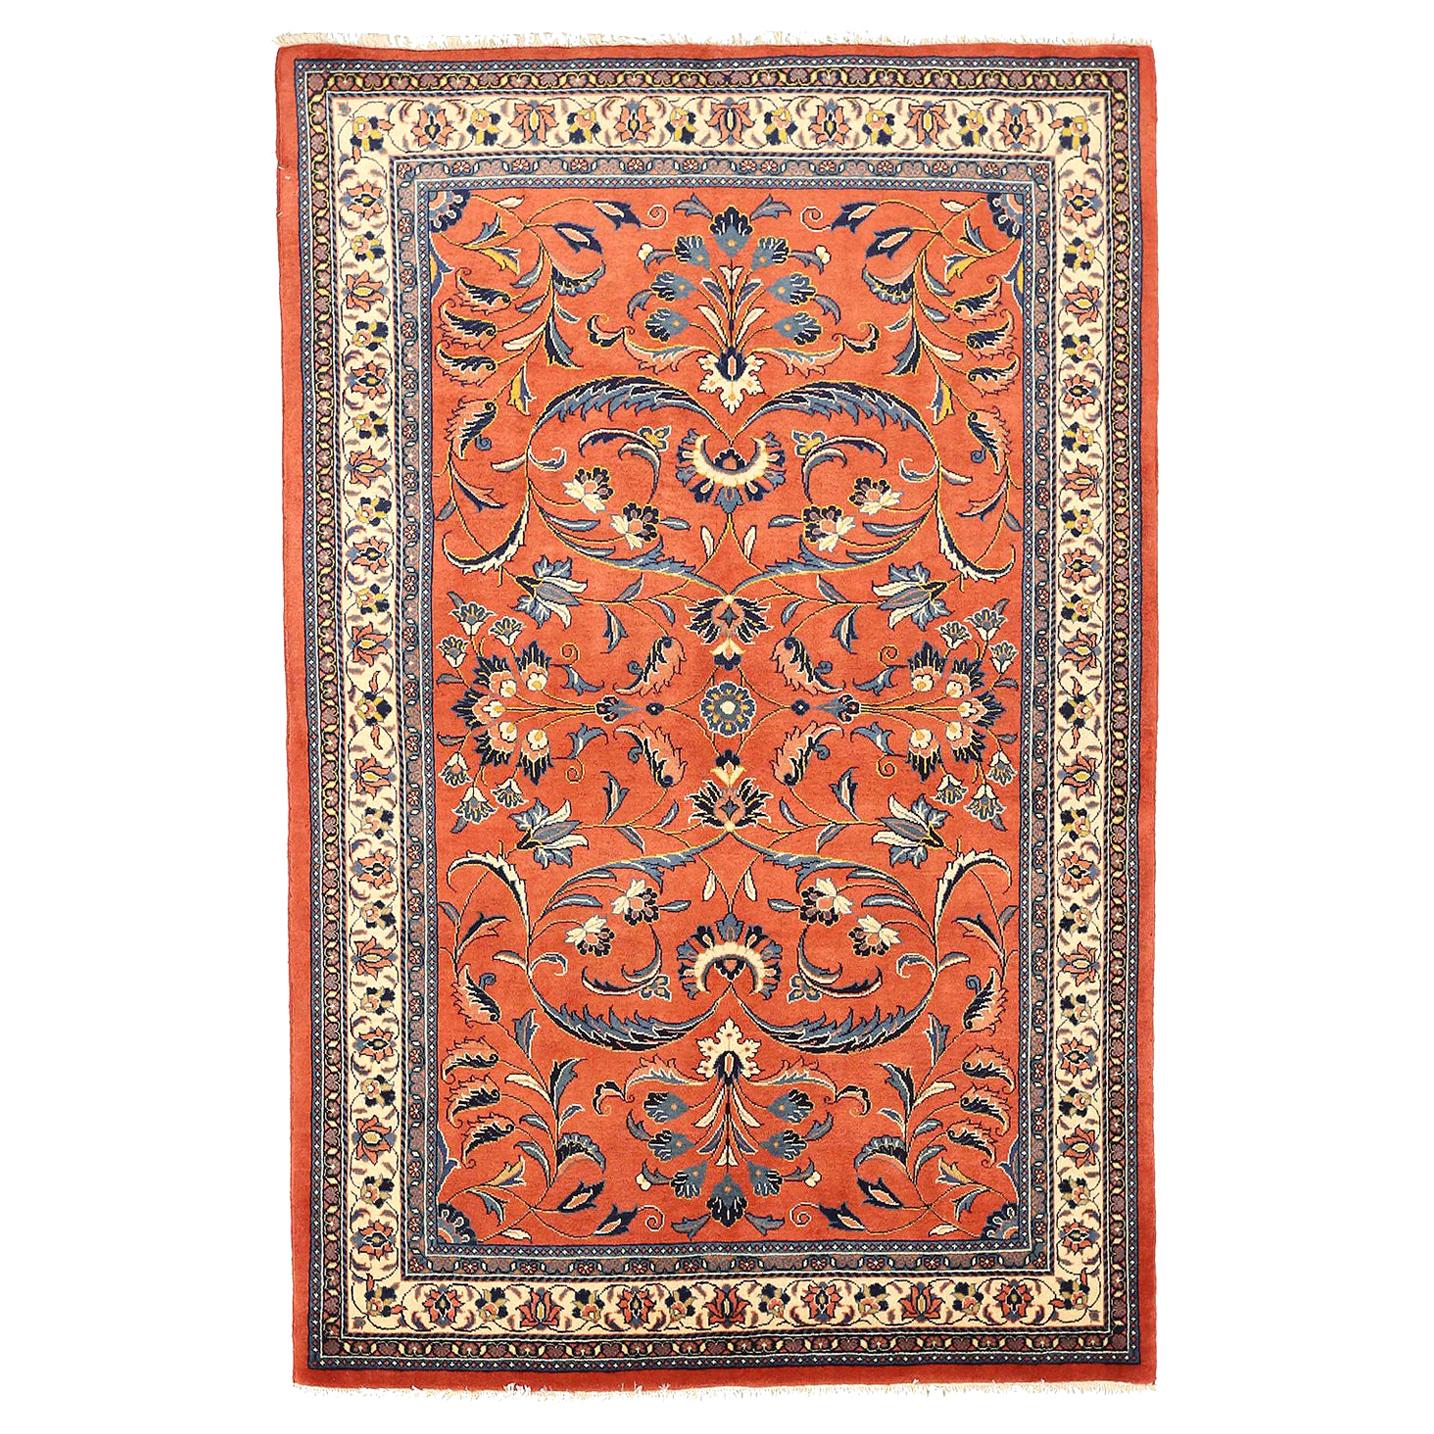 Antique Persian Sarouk Rug with Blue and Ivory Floral Details on Orange Field